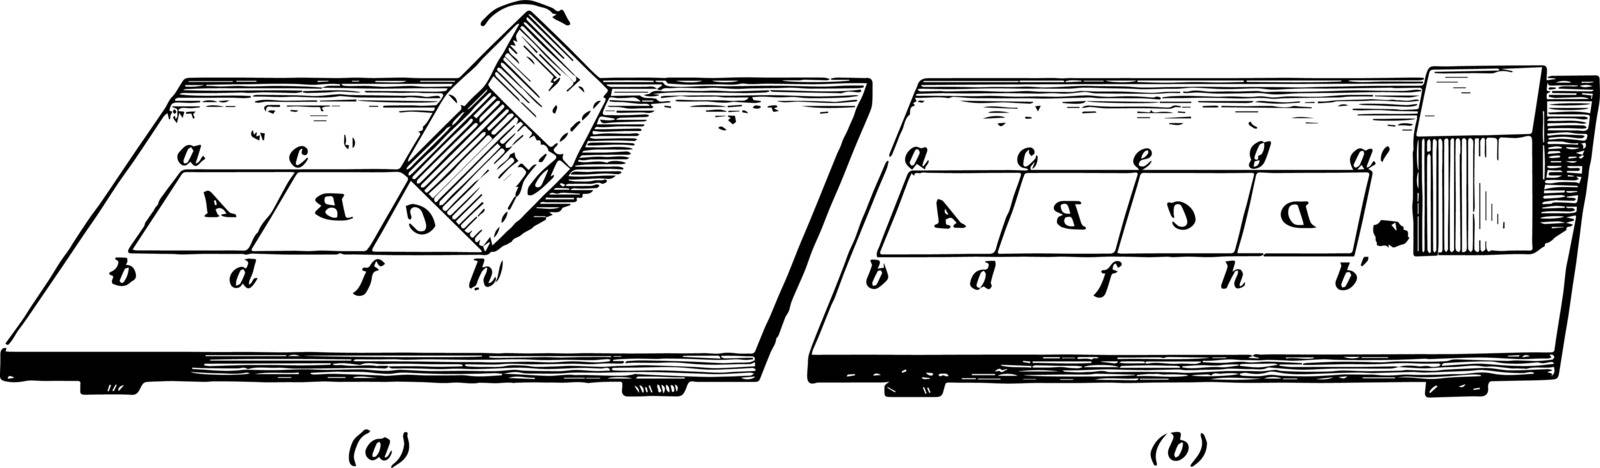 The image shows the development of a rectangular prism. "Now suppose that the prism is on the drawing table, the surface A face down and the paper cover removed by rotating the prism, vintage line drawing or engraving illustration.